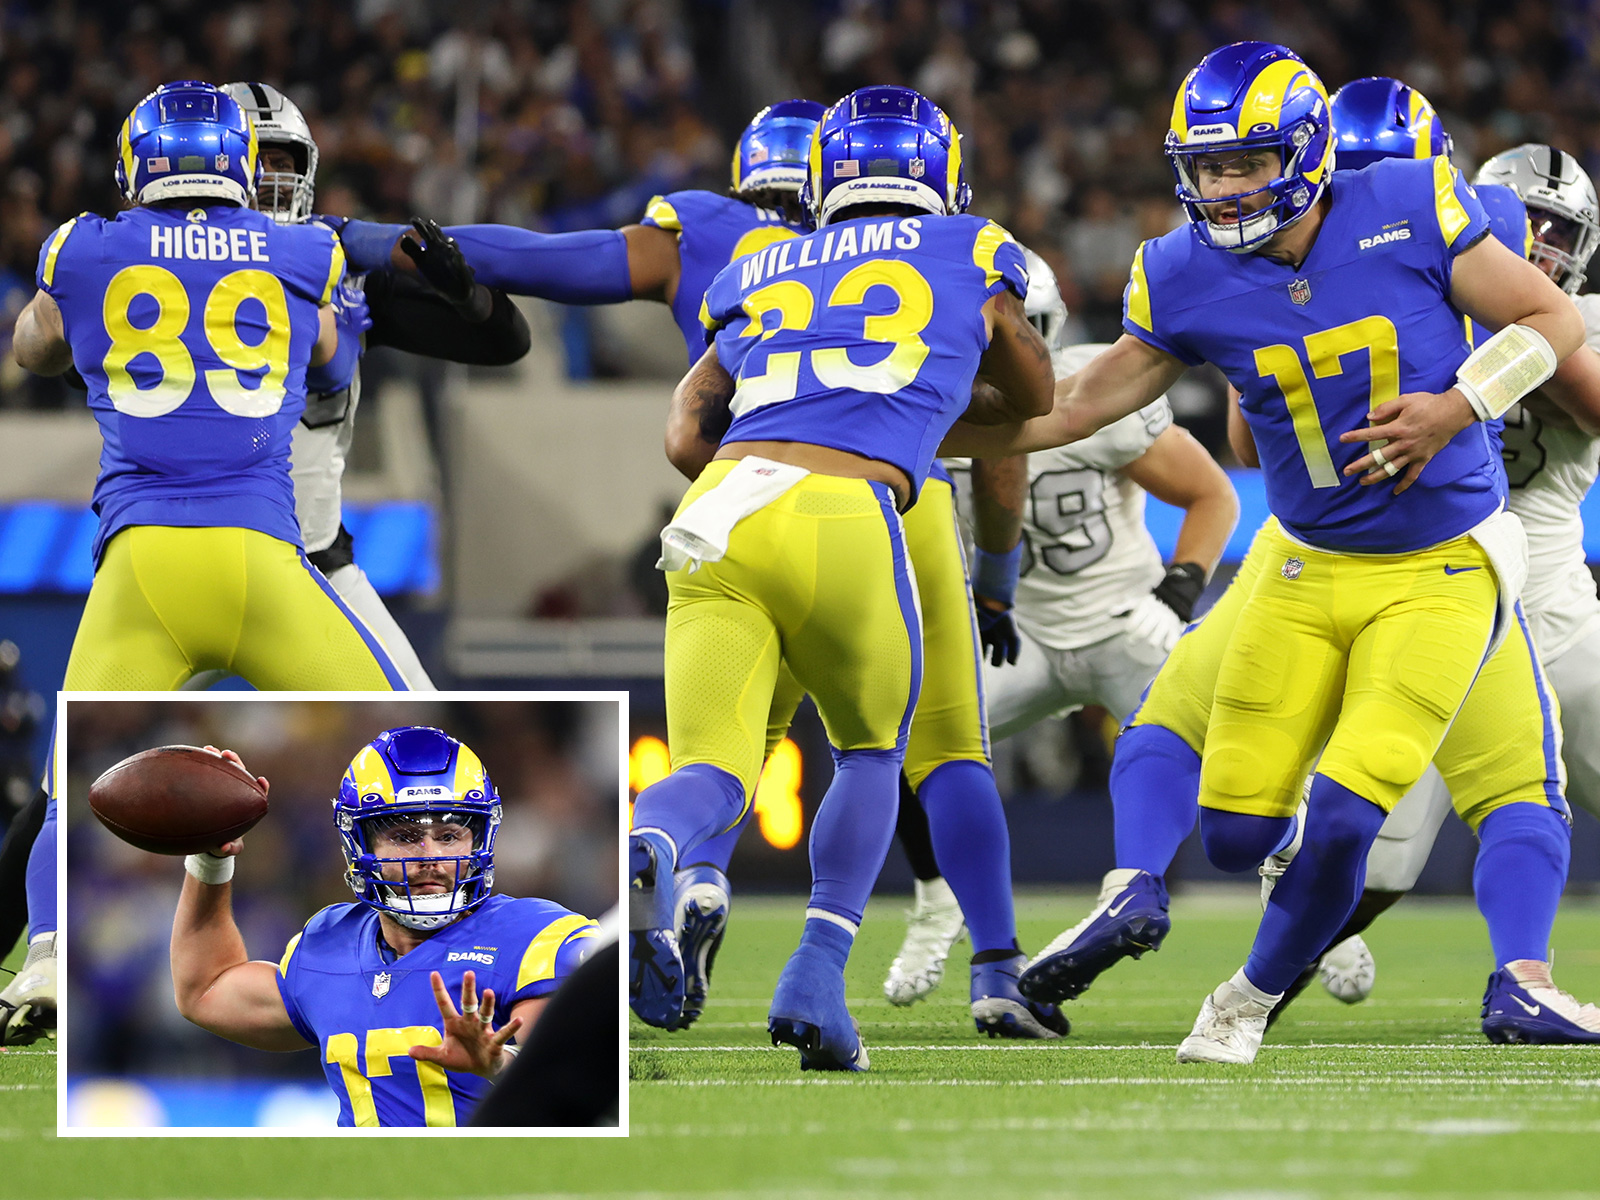 Baker Mayfield leads Los Angeles Rams to improbable win 2 days